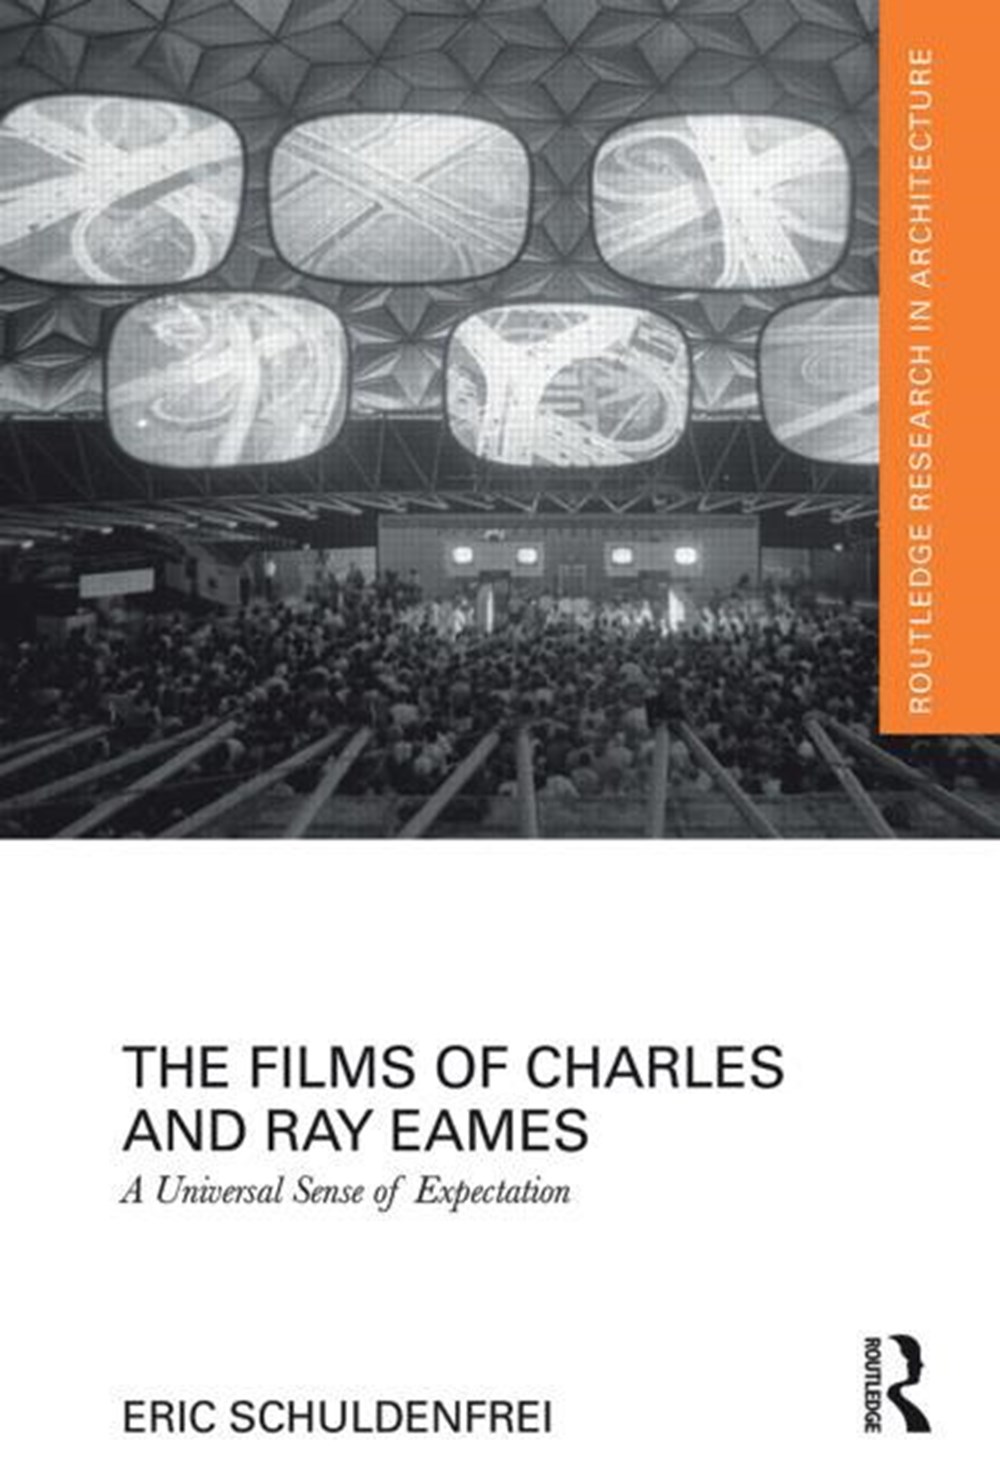 Films of Charles and Ray Eames: A Universal Sense of Expectation